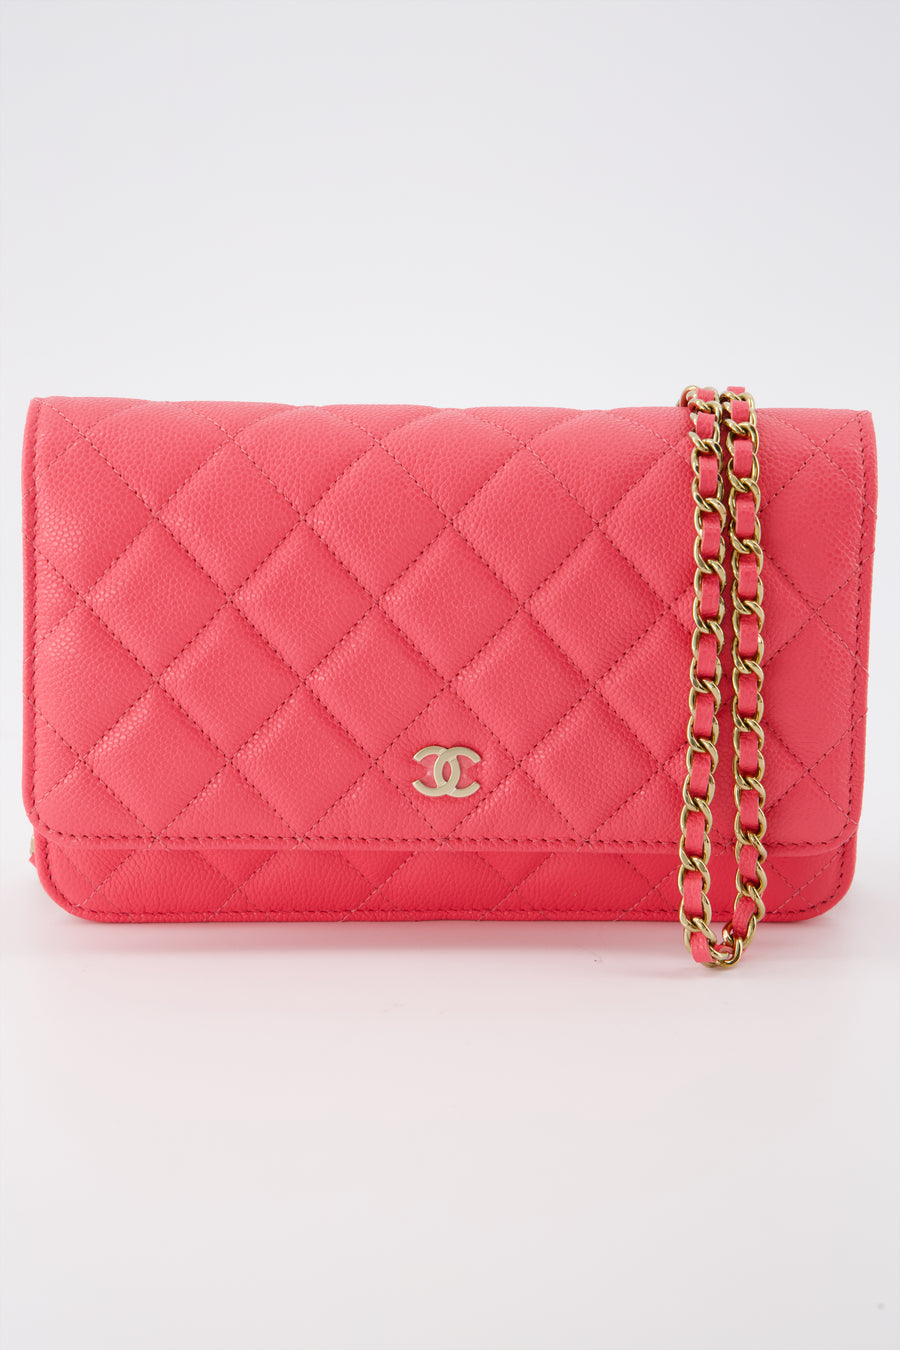 *Brand New* Chanel Classic Wallet on Chain WOC in Deep Blue Lambskin  Champagne Gold HW